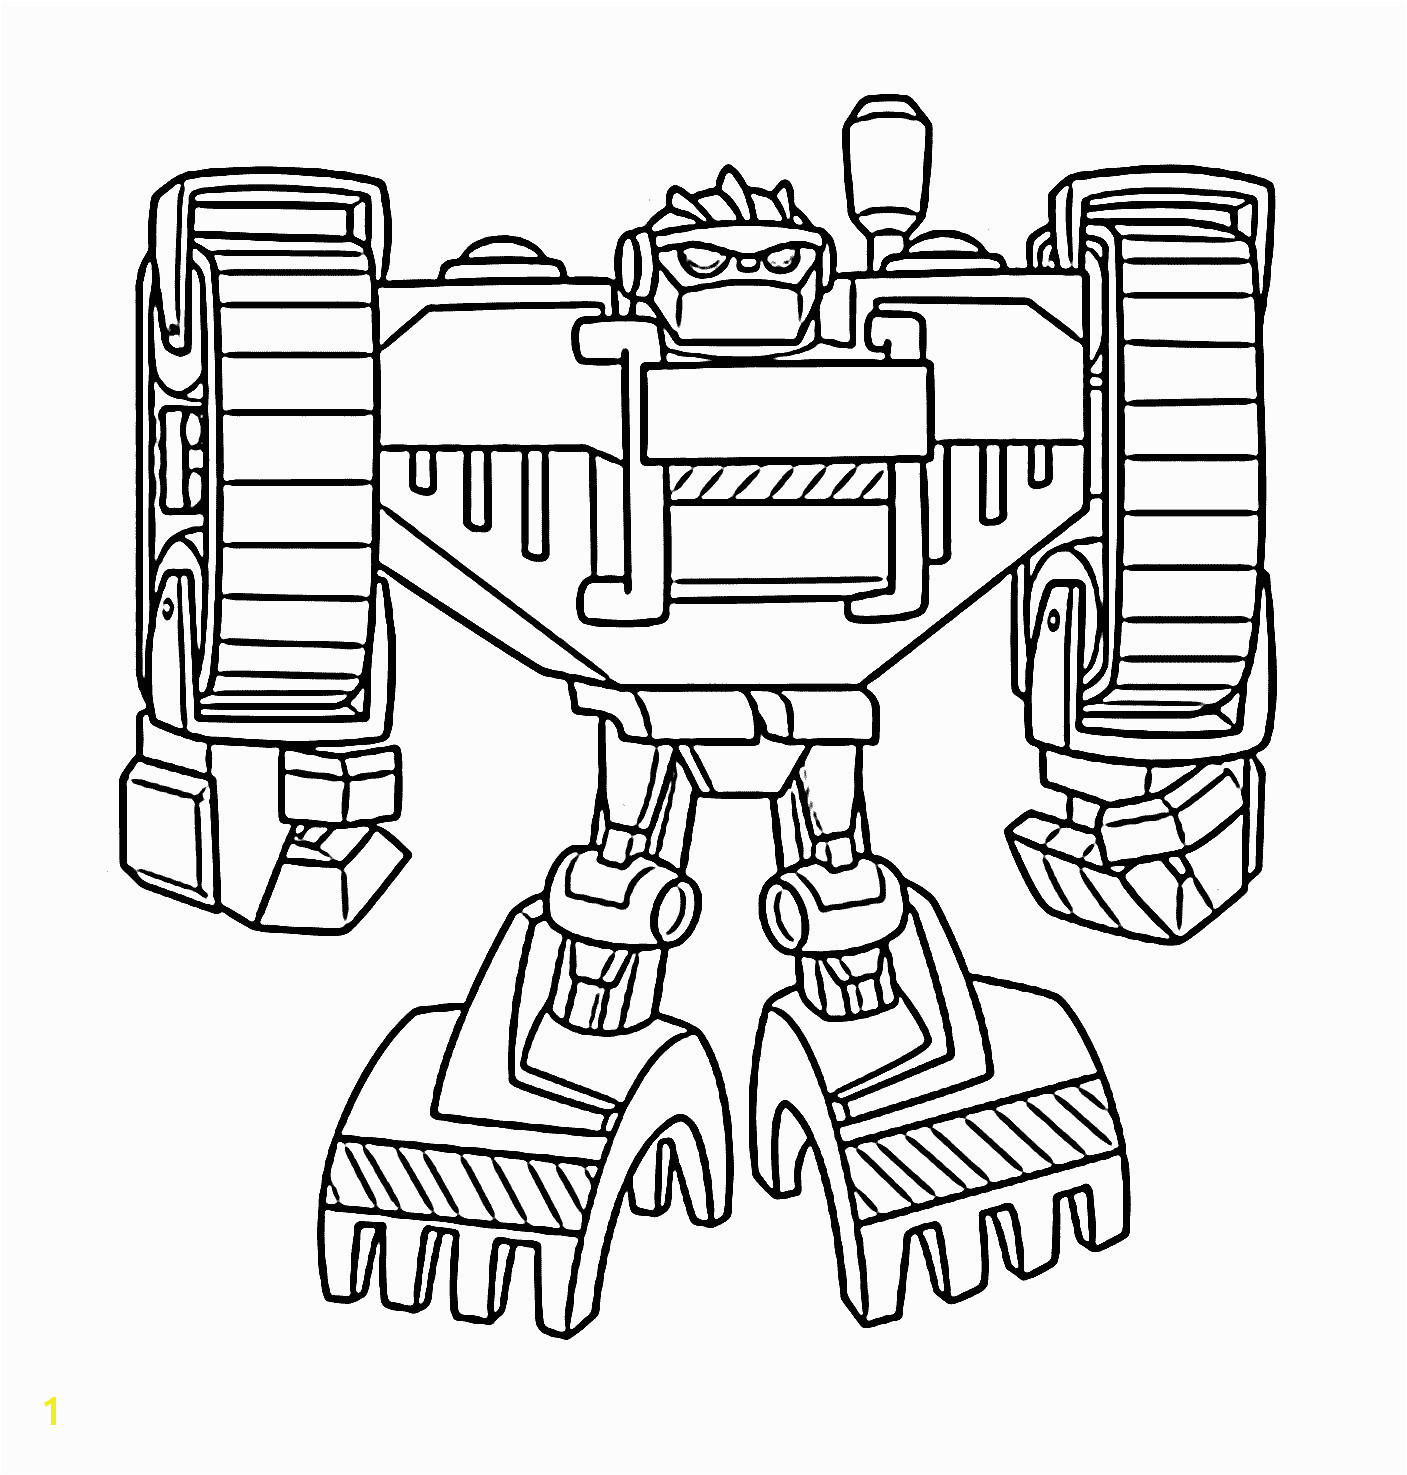 Rescue Bots Heatwave Coloring Page Boulder Bot Coloring Pages for Kids Printable Free Rescue Bots